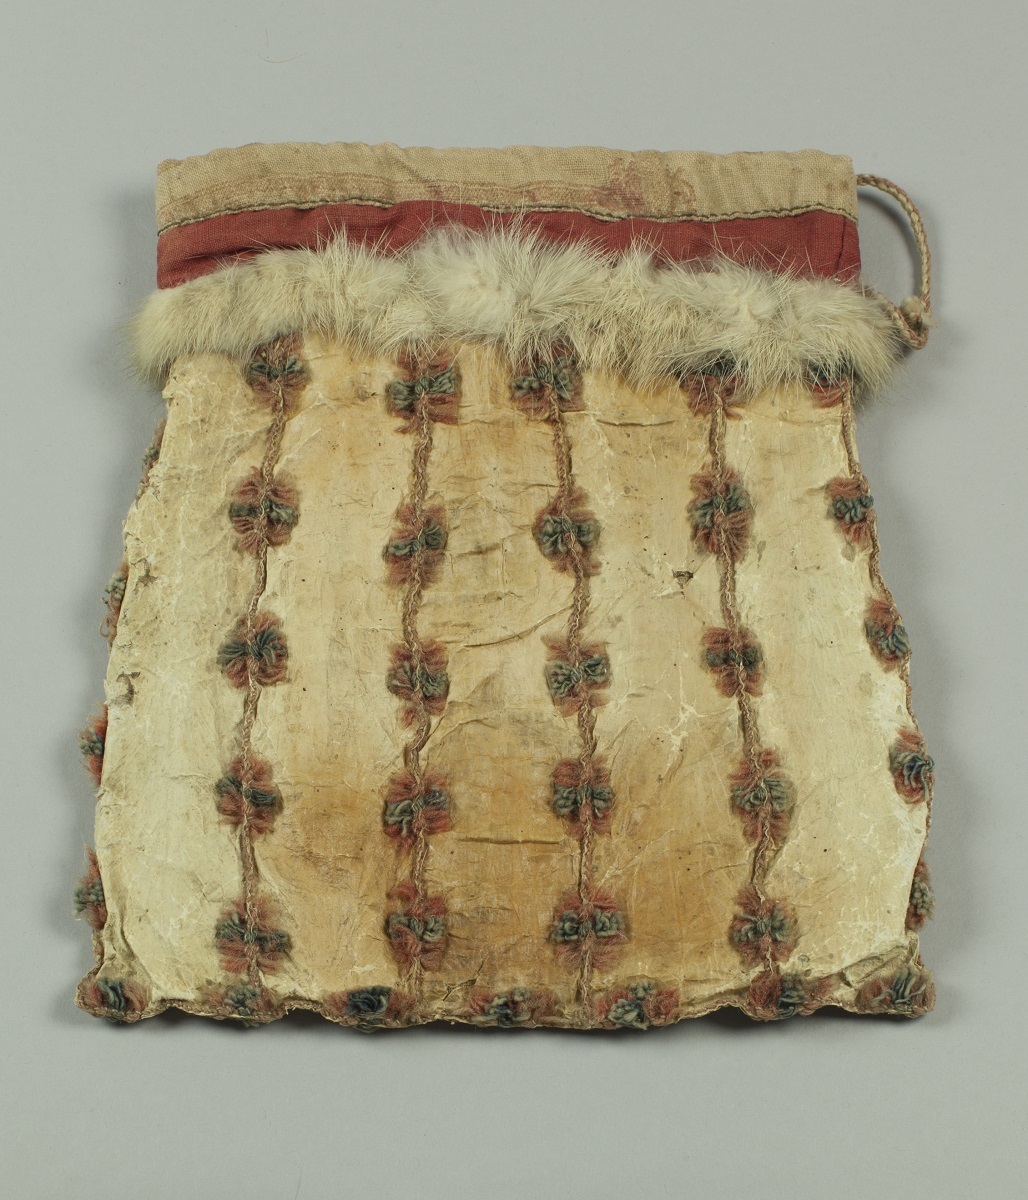 This skin and fur purse lined with fabric from a Eureka Mills dry goods bag is another item donated to the Museum by Archdeacon Lingard. Canterbury Museum 1894.131.6